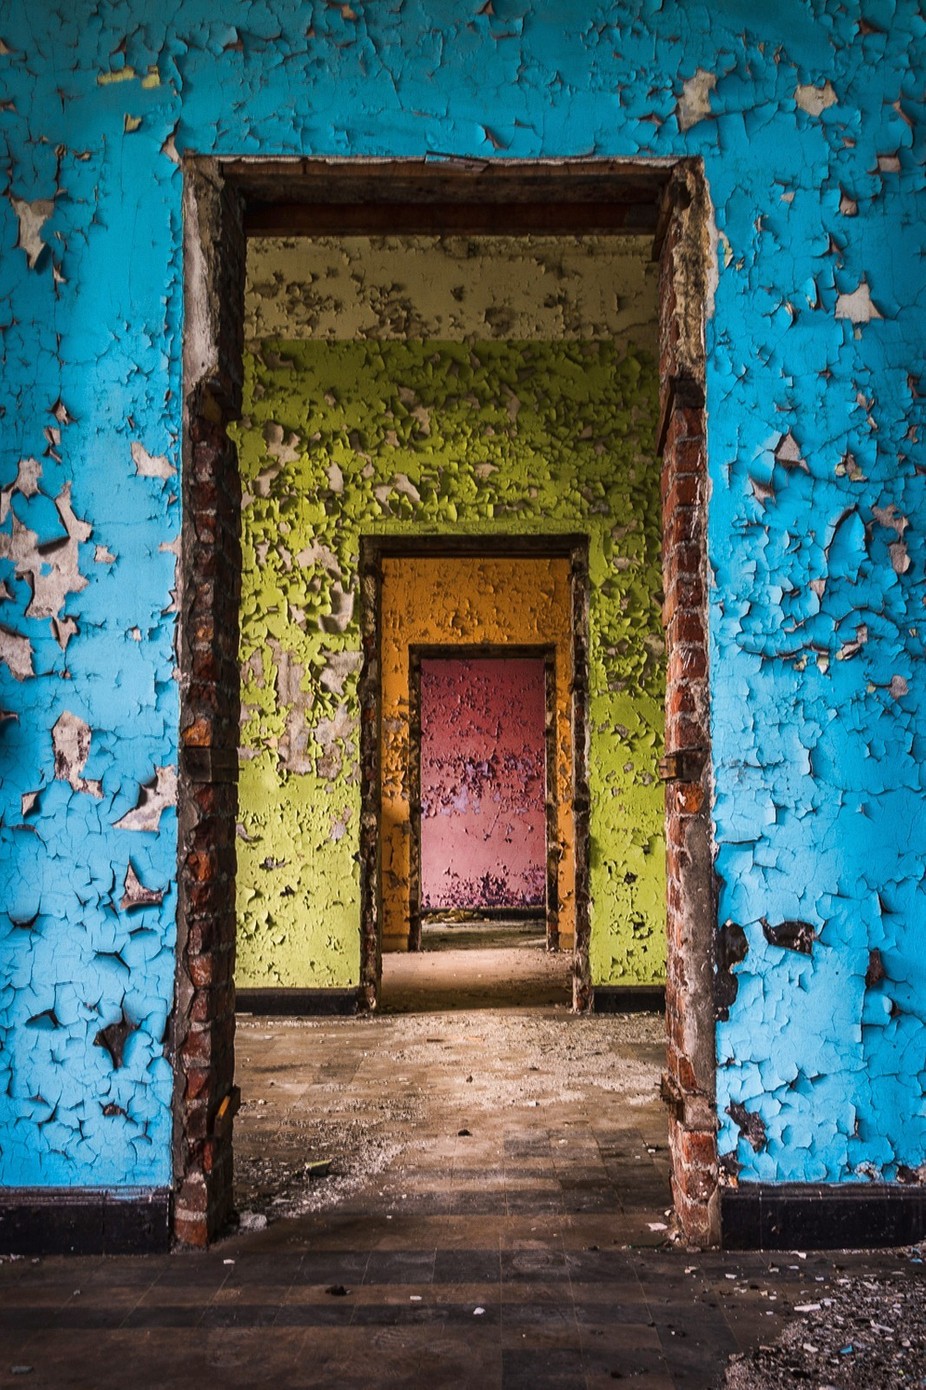 Prison 11 Doors by stefgoovaerts - Color Theory Photo Contest